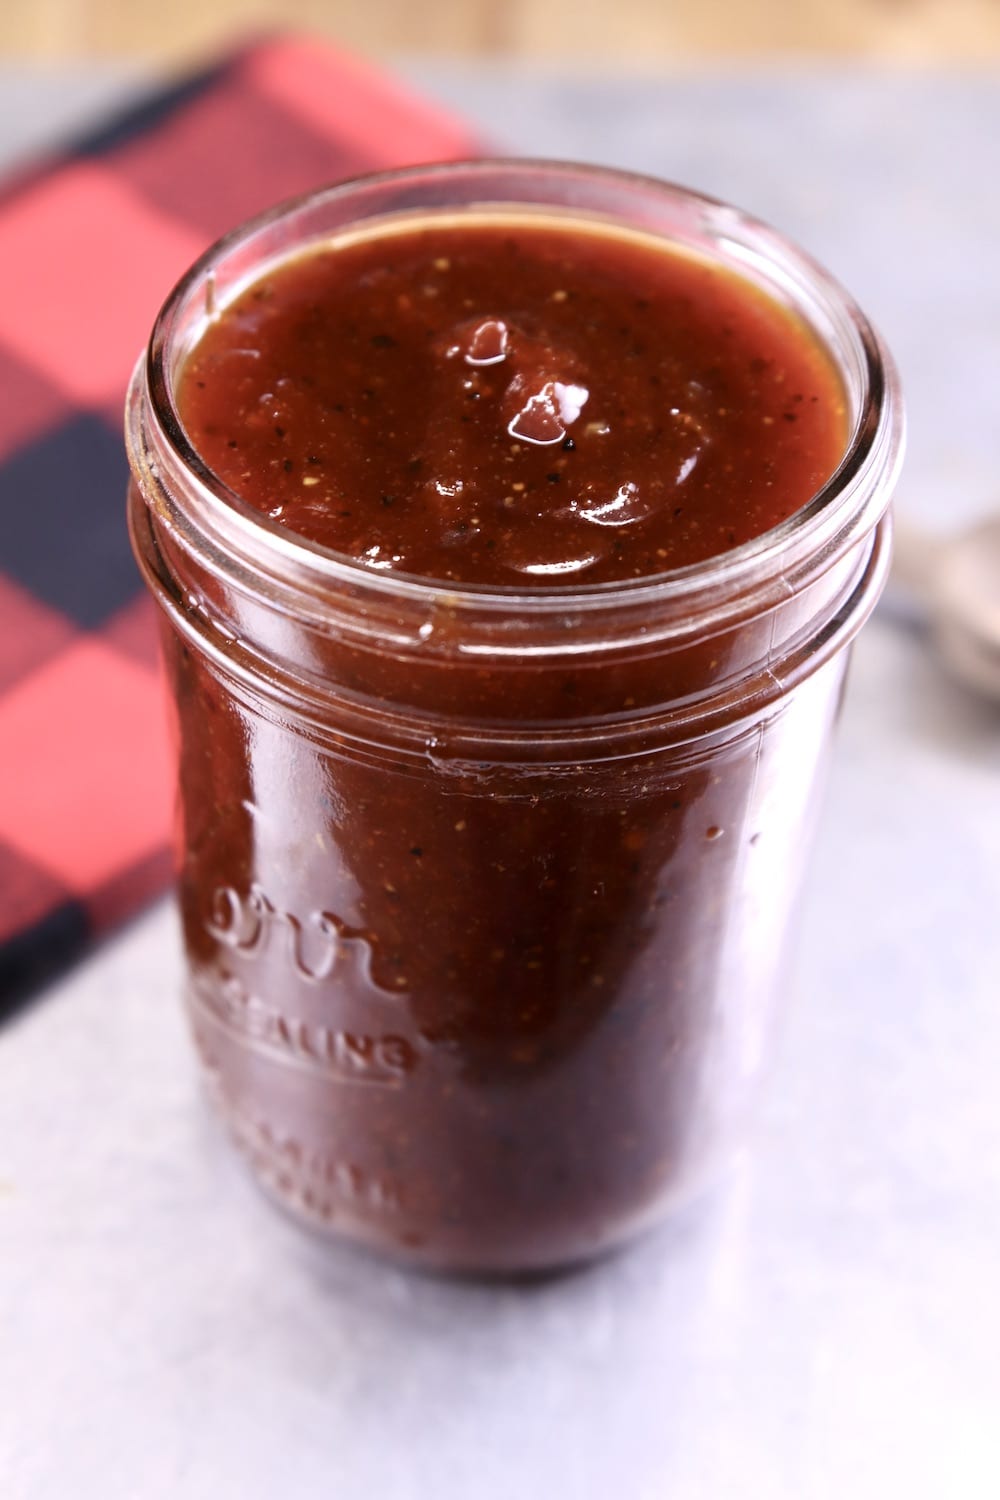 Jar of barbecue sauce with red and black check napkin